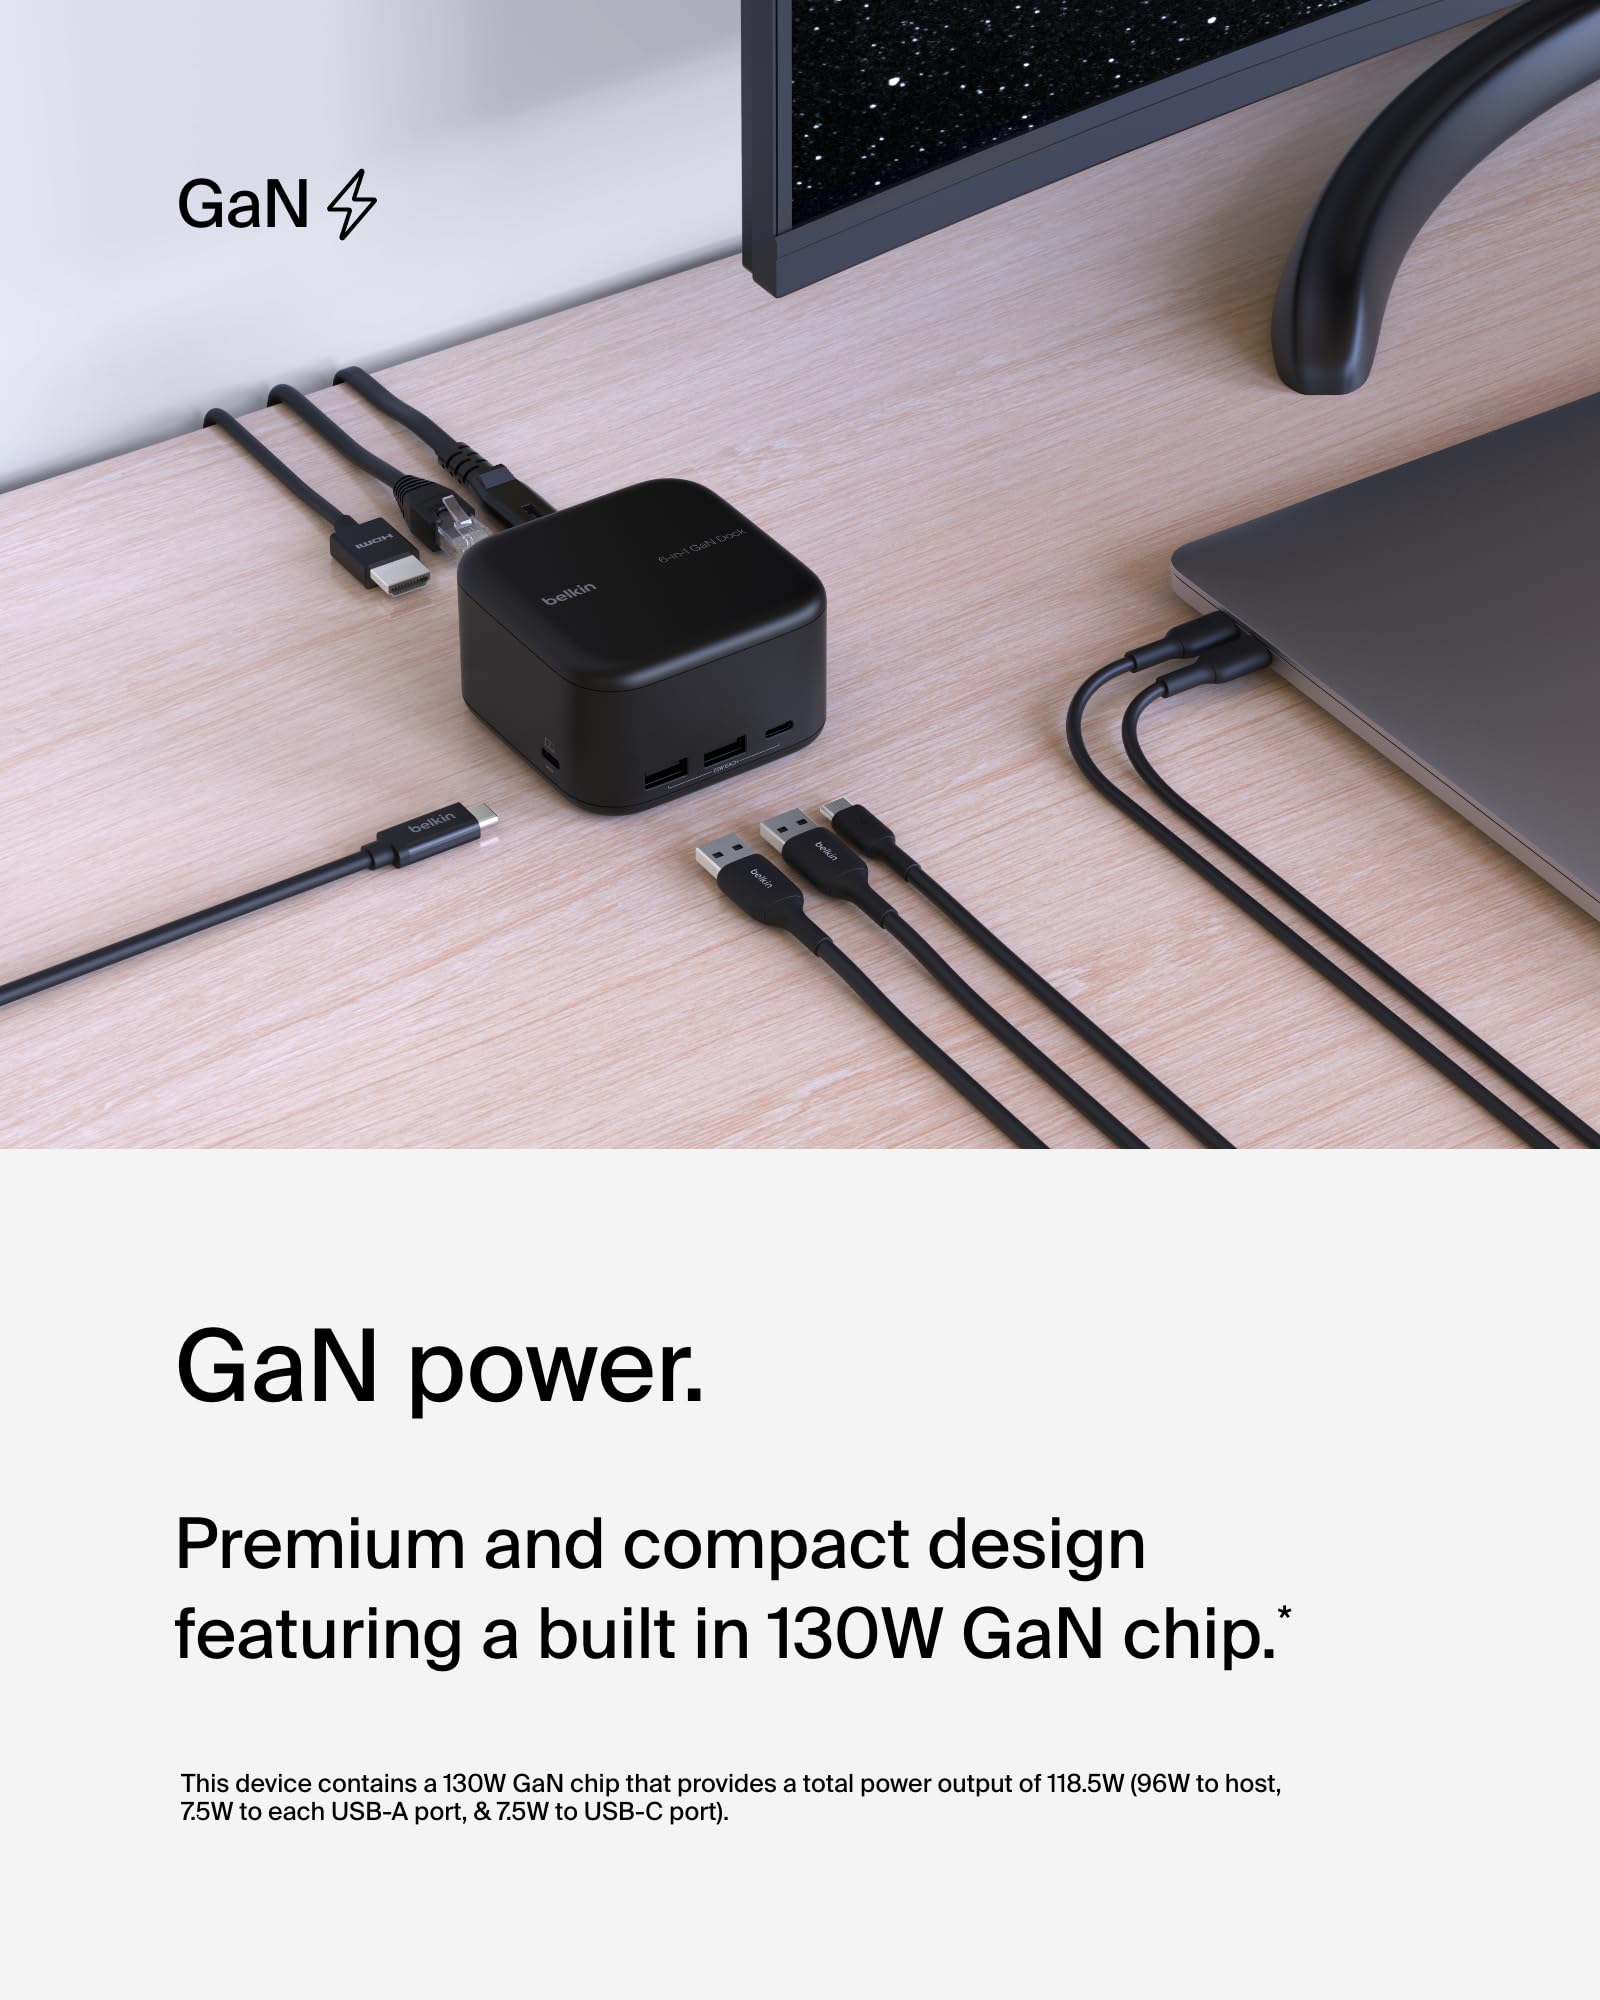 Belkin Connect USB-C 6-in-1 Core GaN Dock 130W, Multiport Docking Station w/ 96W PD to Peripherals, USB-C, USB-A, Gigabit Ethernet, & HDMI 4K Ports for Gaming, MacBook Pro, PC Laptops, & Chromebook